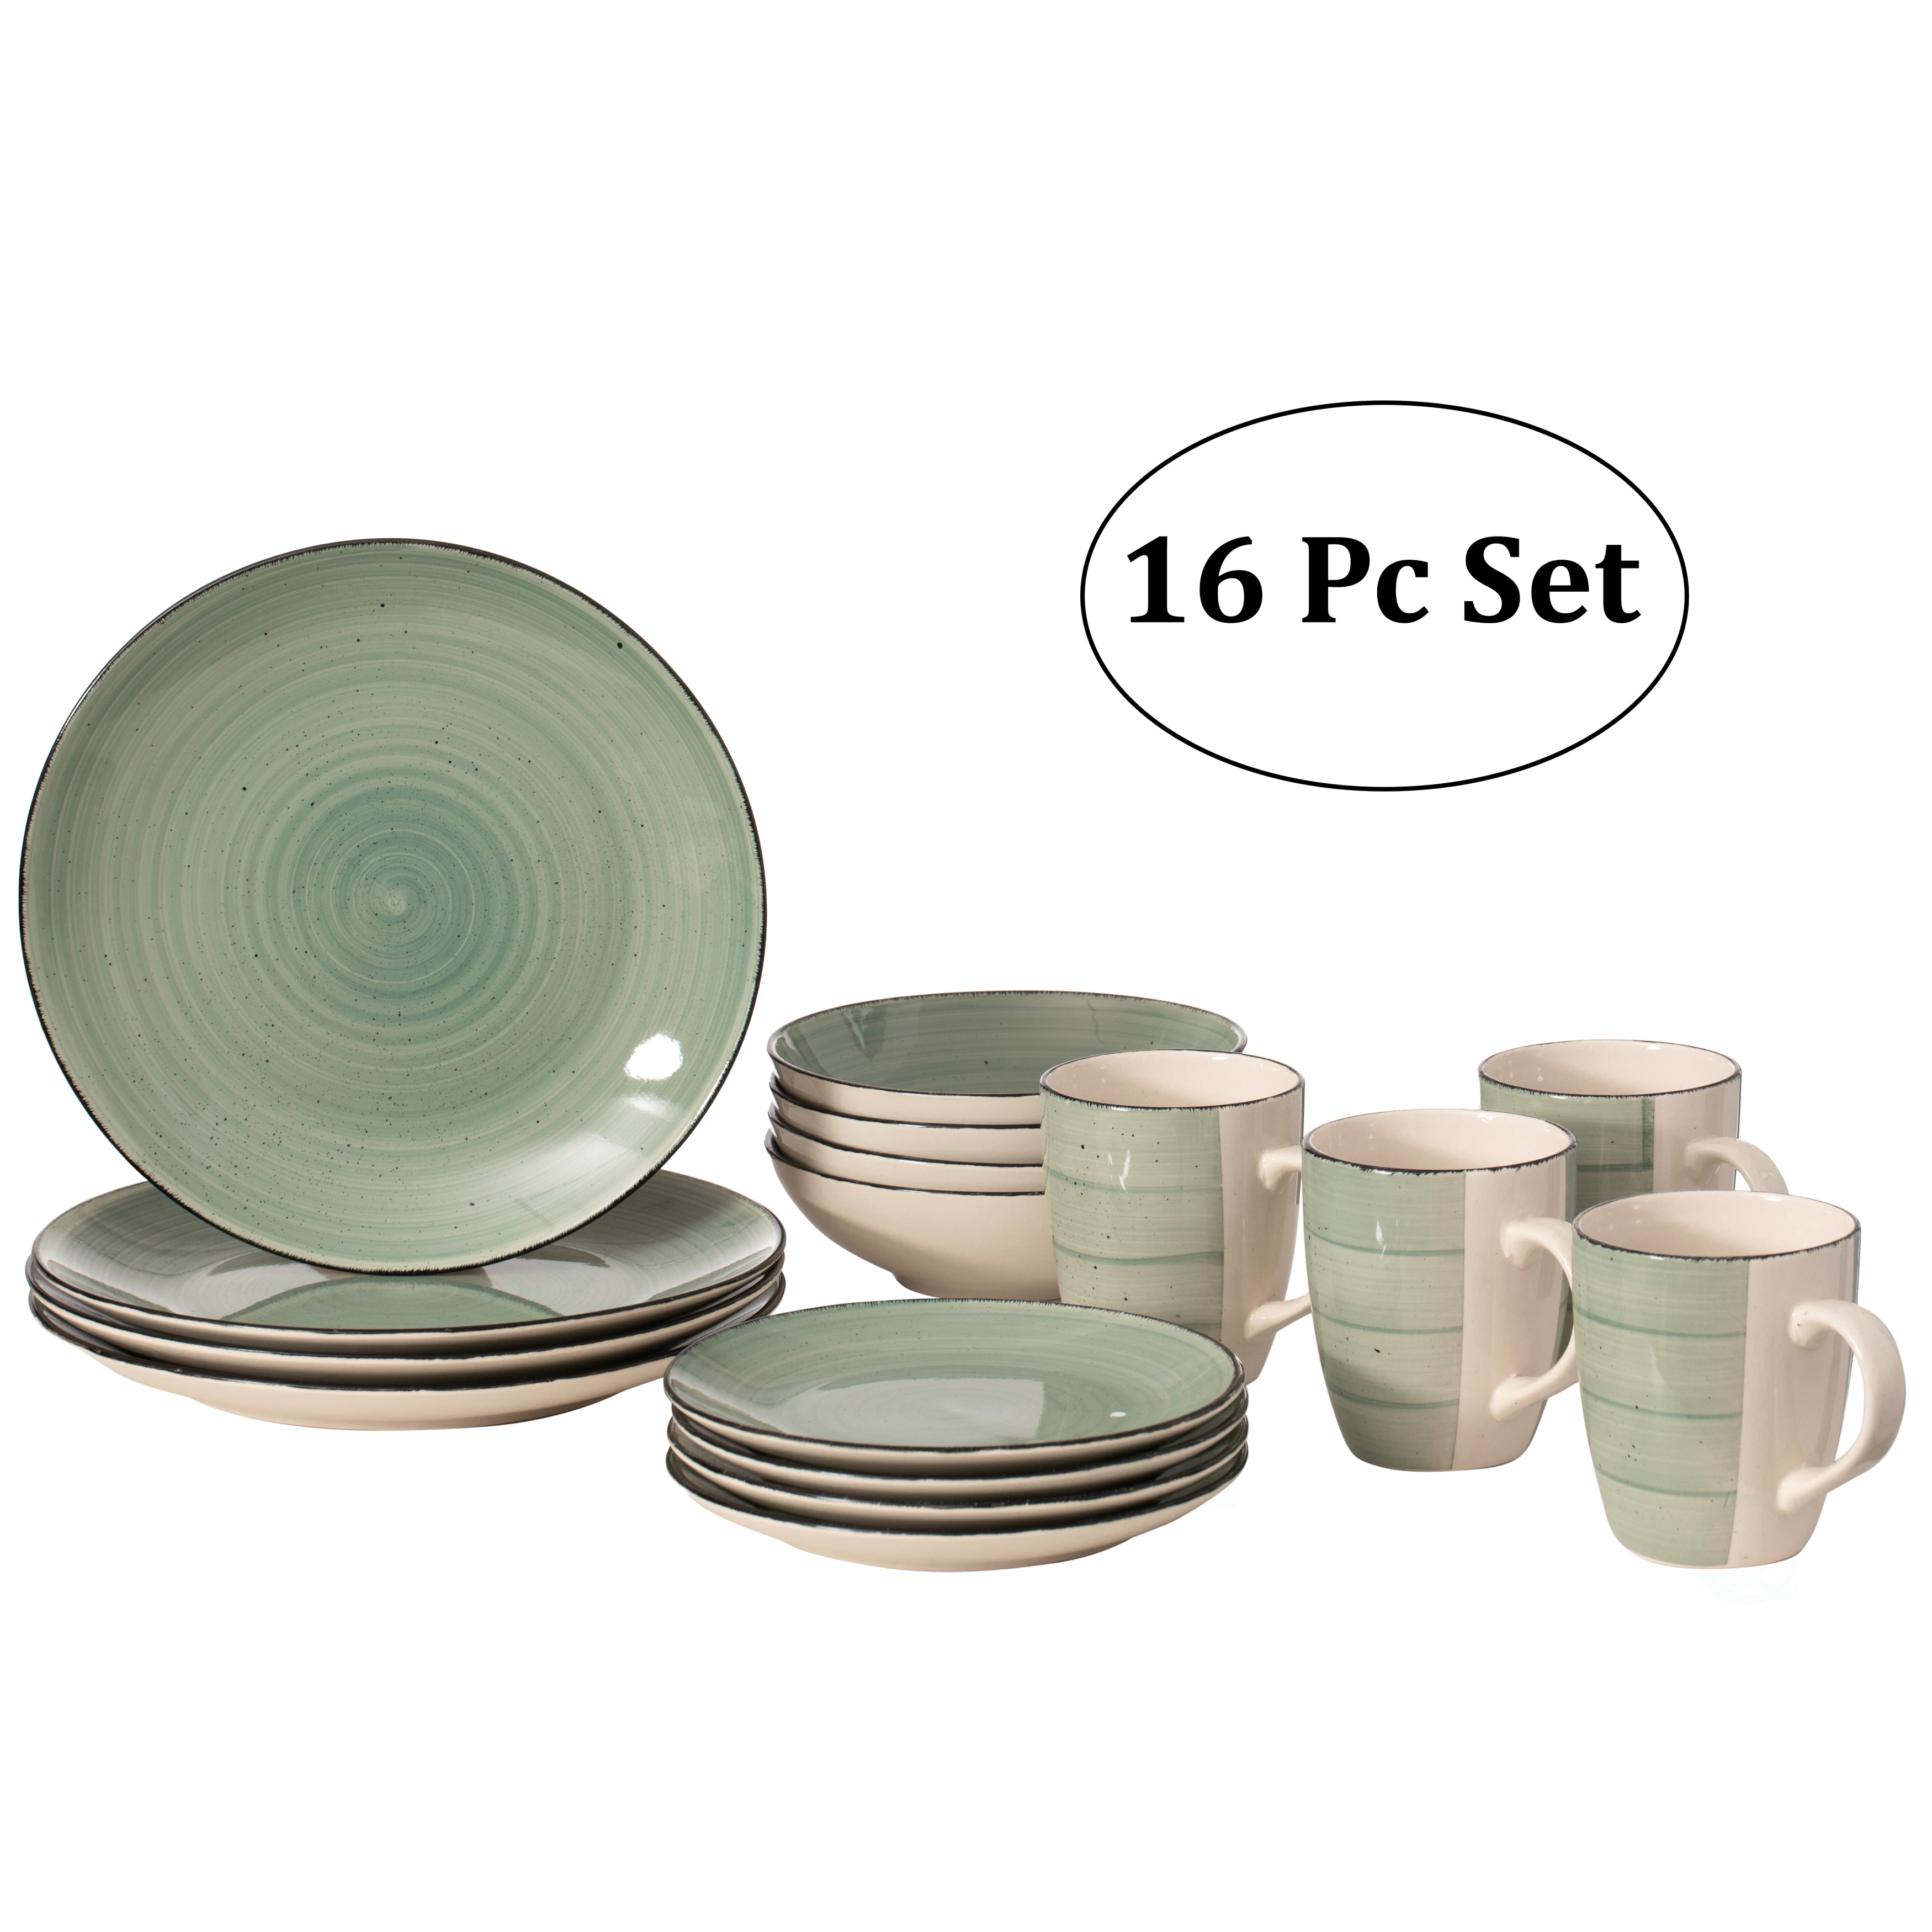 16 PC Spin Wash Dinnerware Dish Set For 4 Person Mugs, Salad And Dinner Plates And Bowls Sets, Dishwasher And Microwave Safe - White